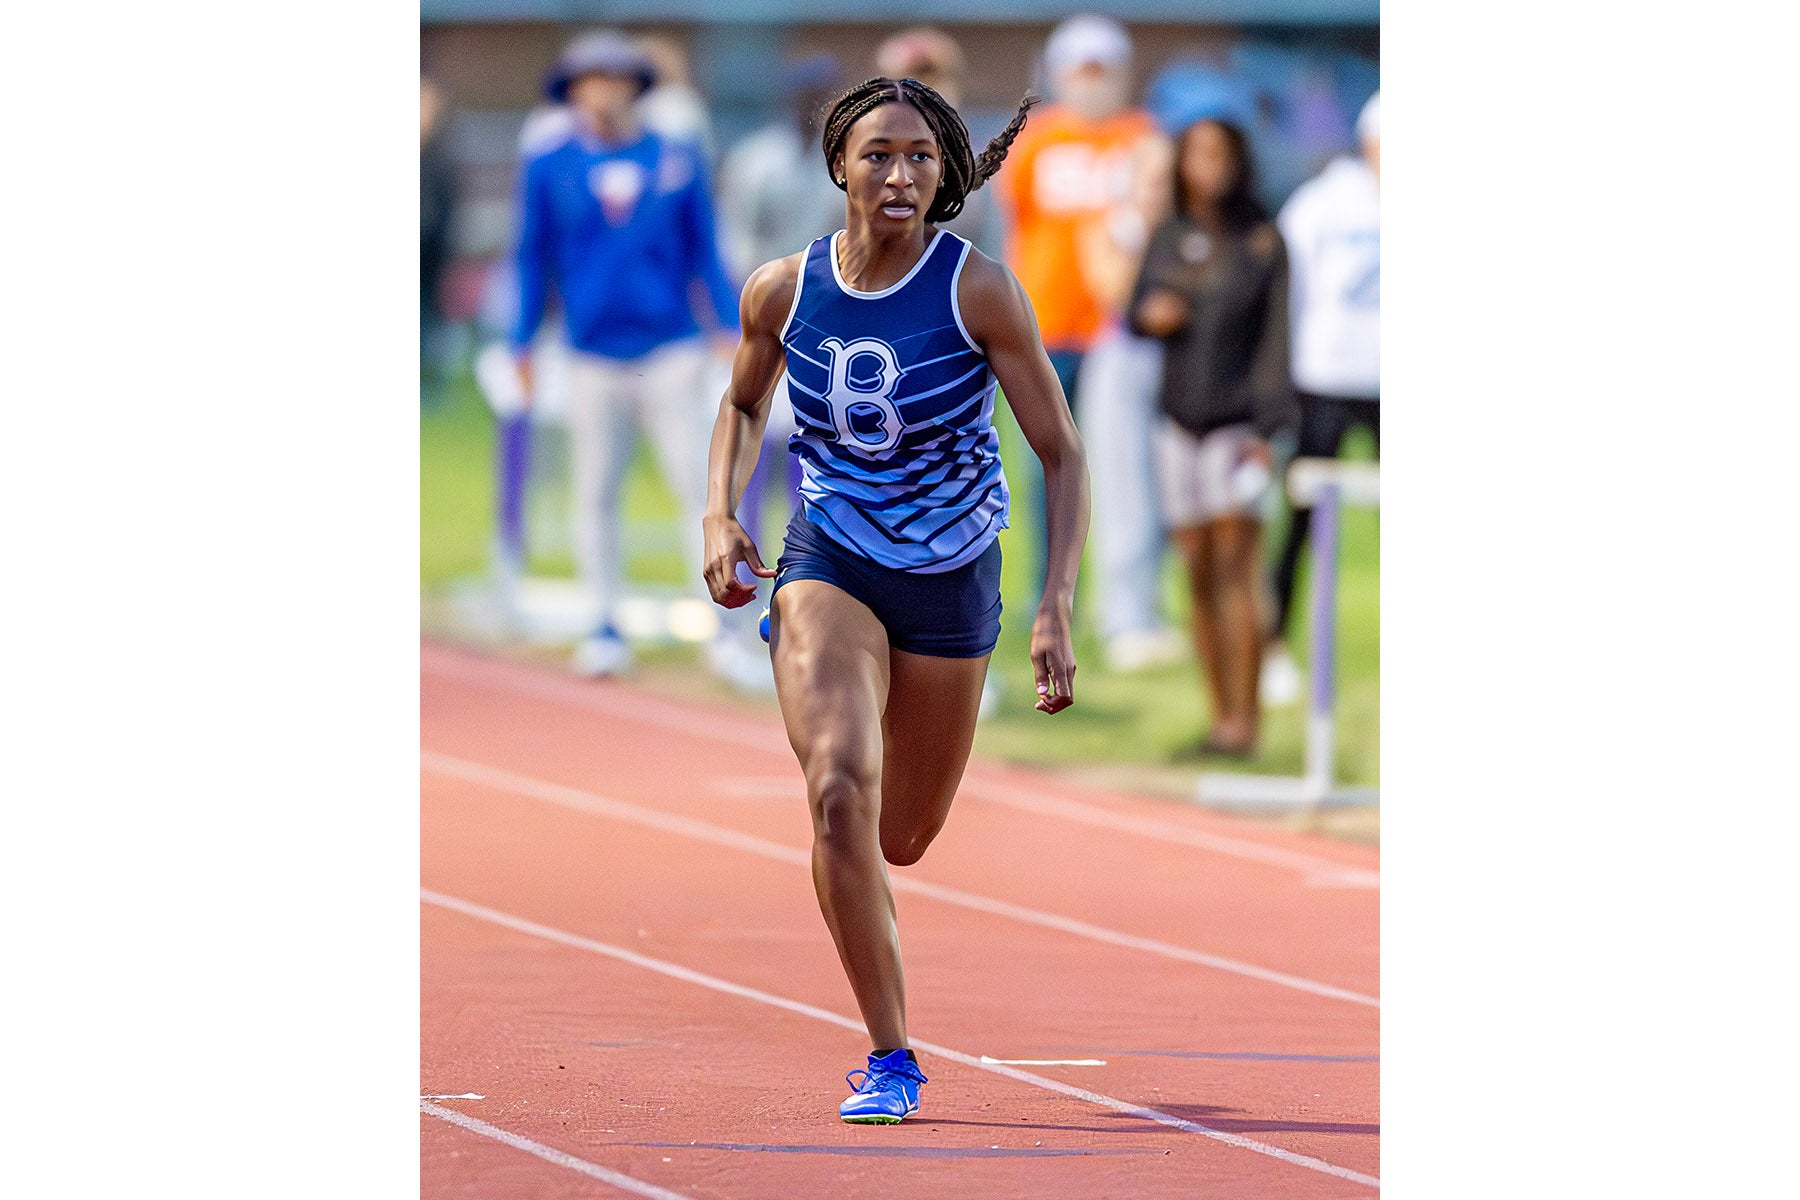 Burks sets state 5A and composite 400-meter dash record - American Press